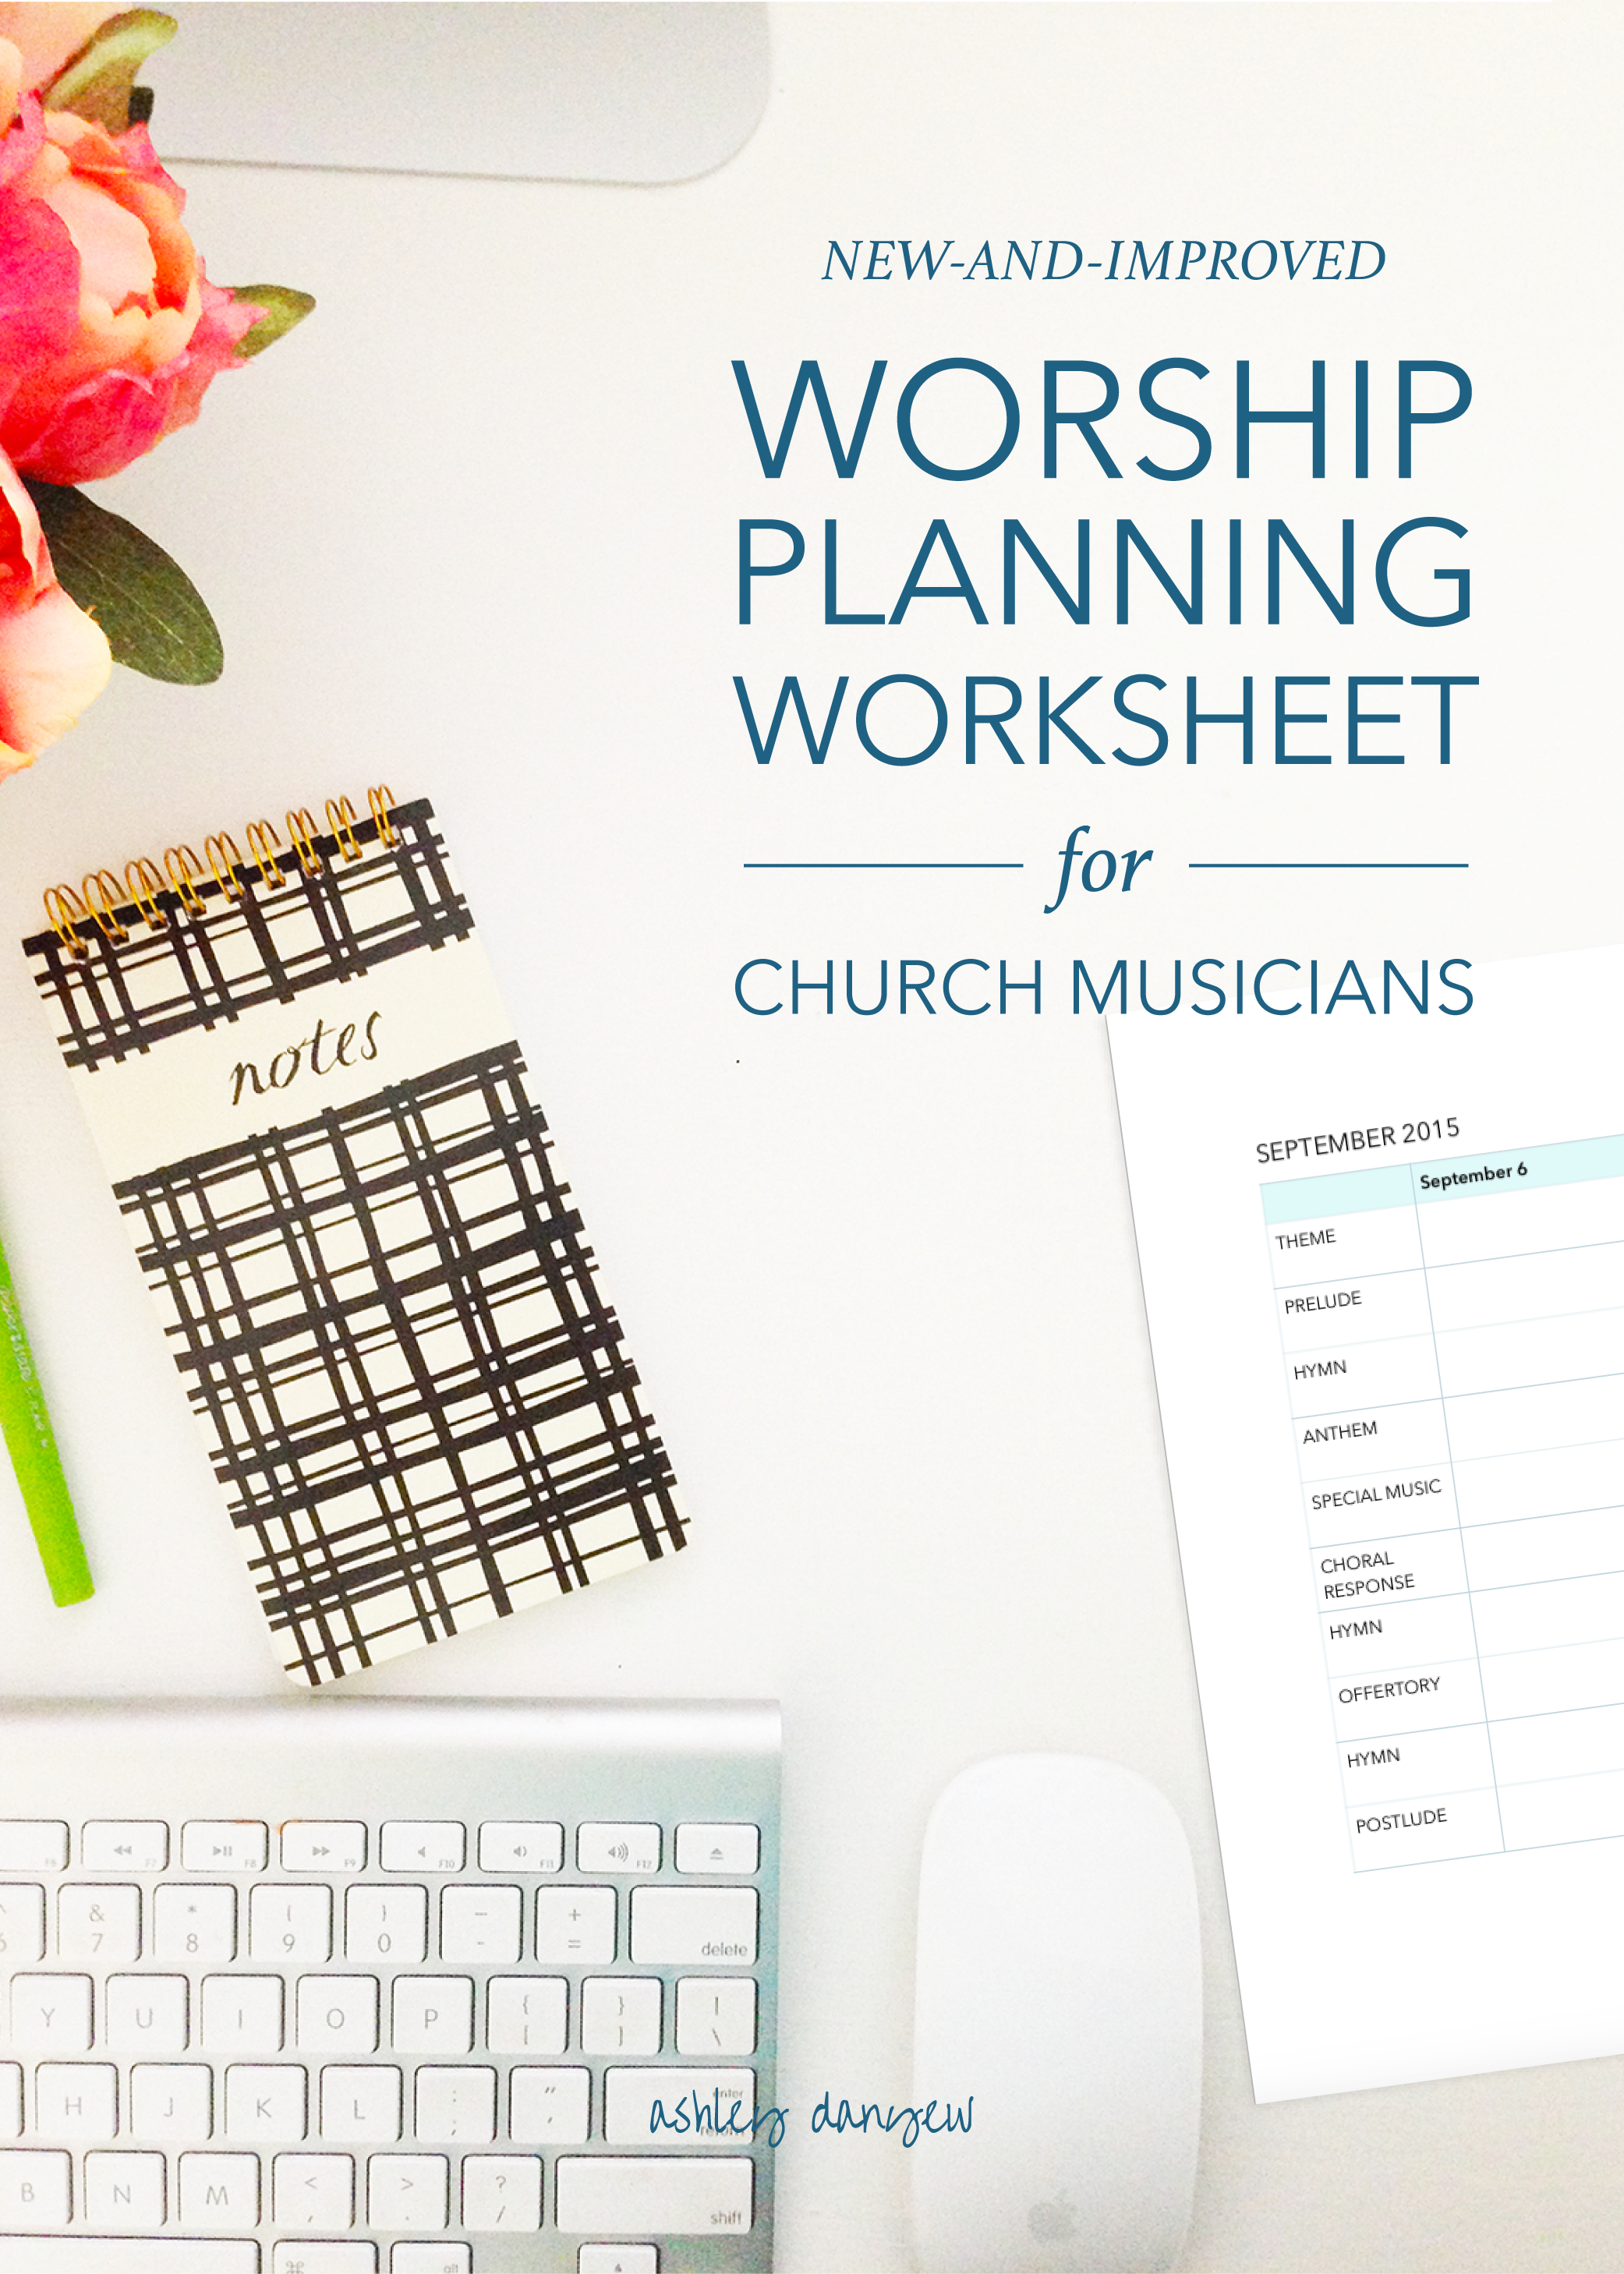 Copy of A New-and-Improved Worship Planning Worksheet for Church Musicians